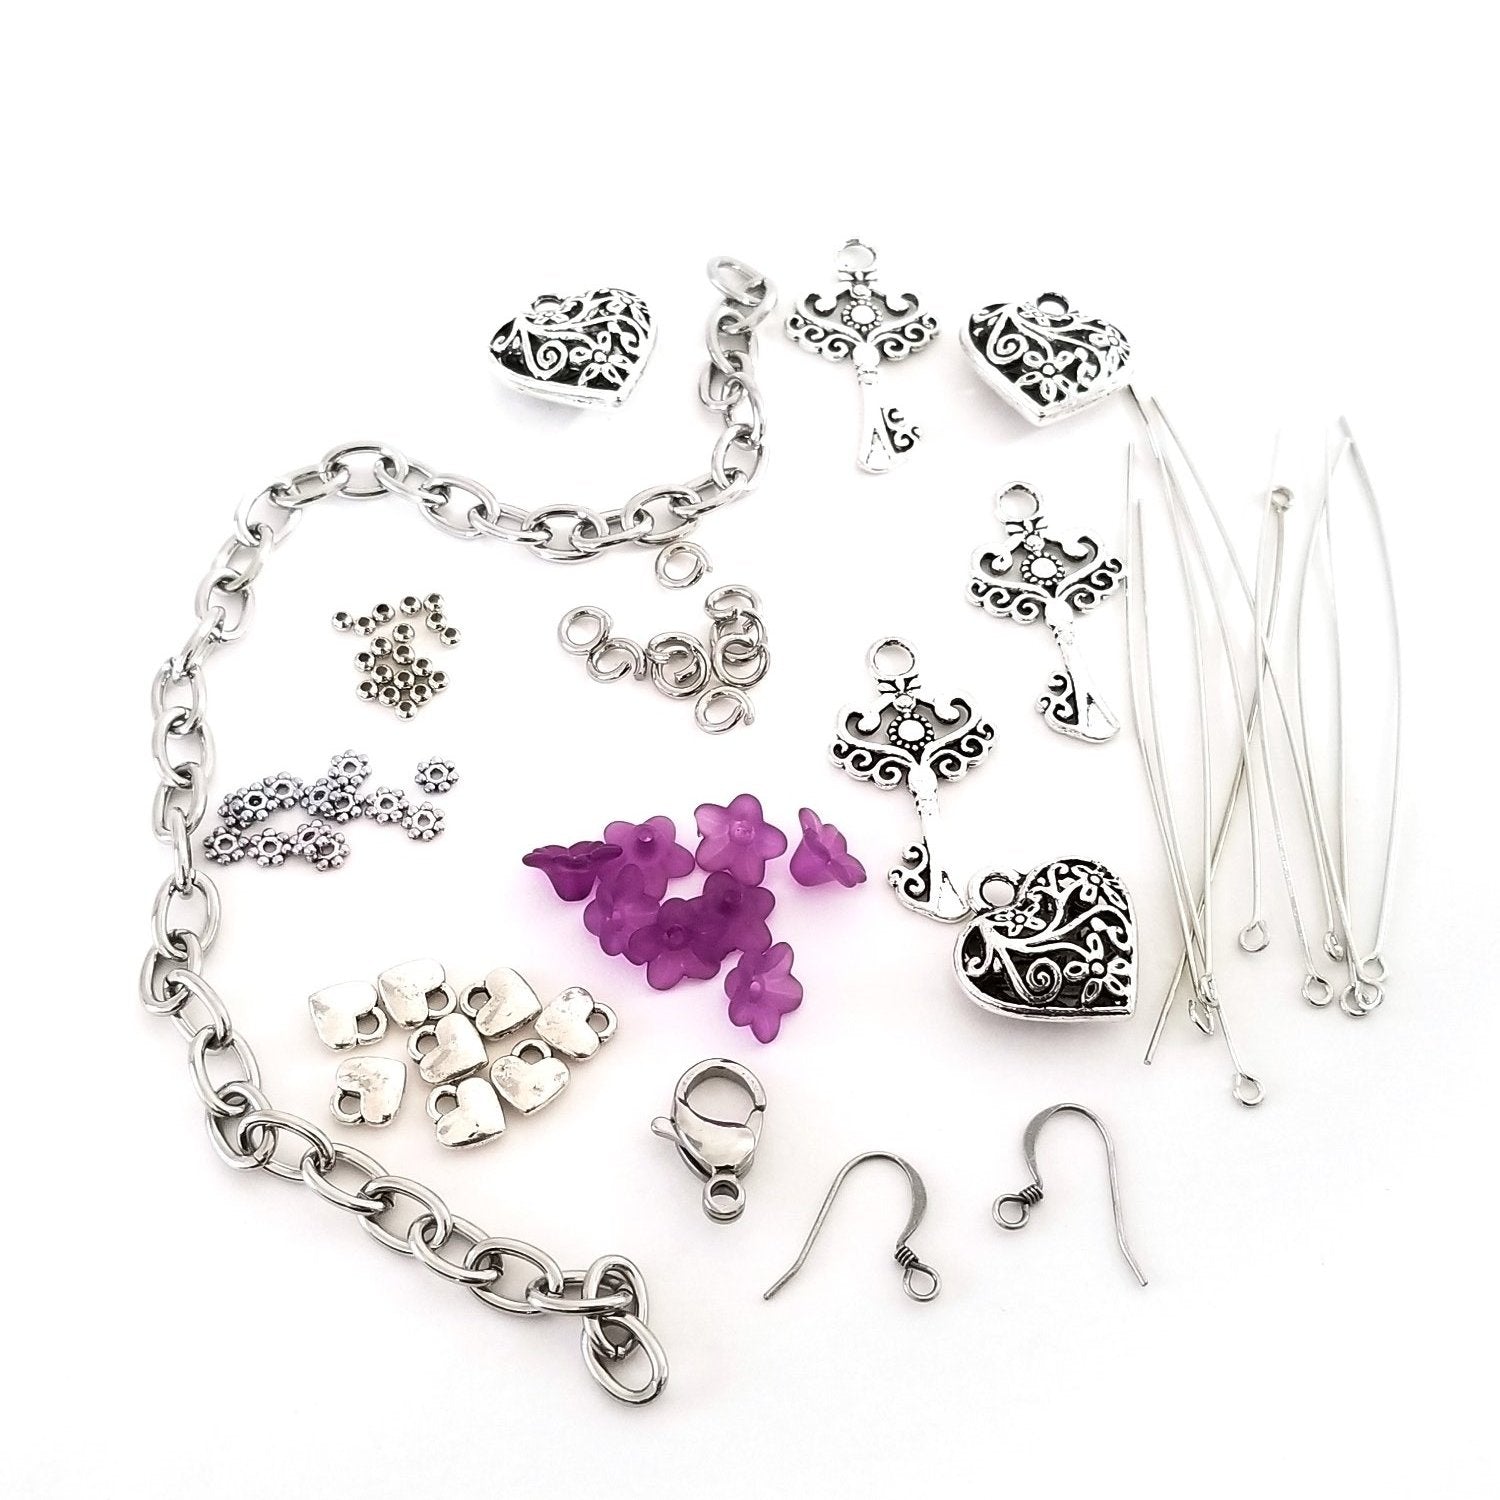 Sterling Silver Charm Bracelet Chain - Add Your Own Charm!